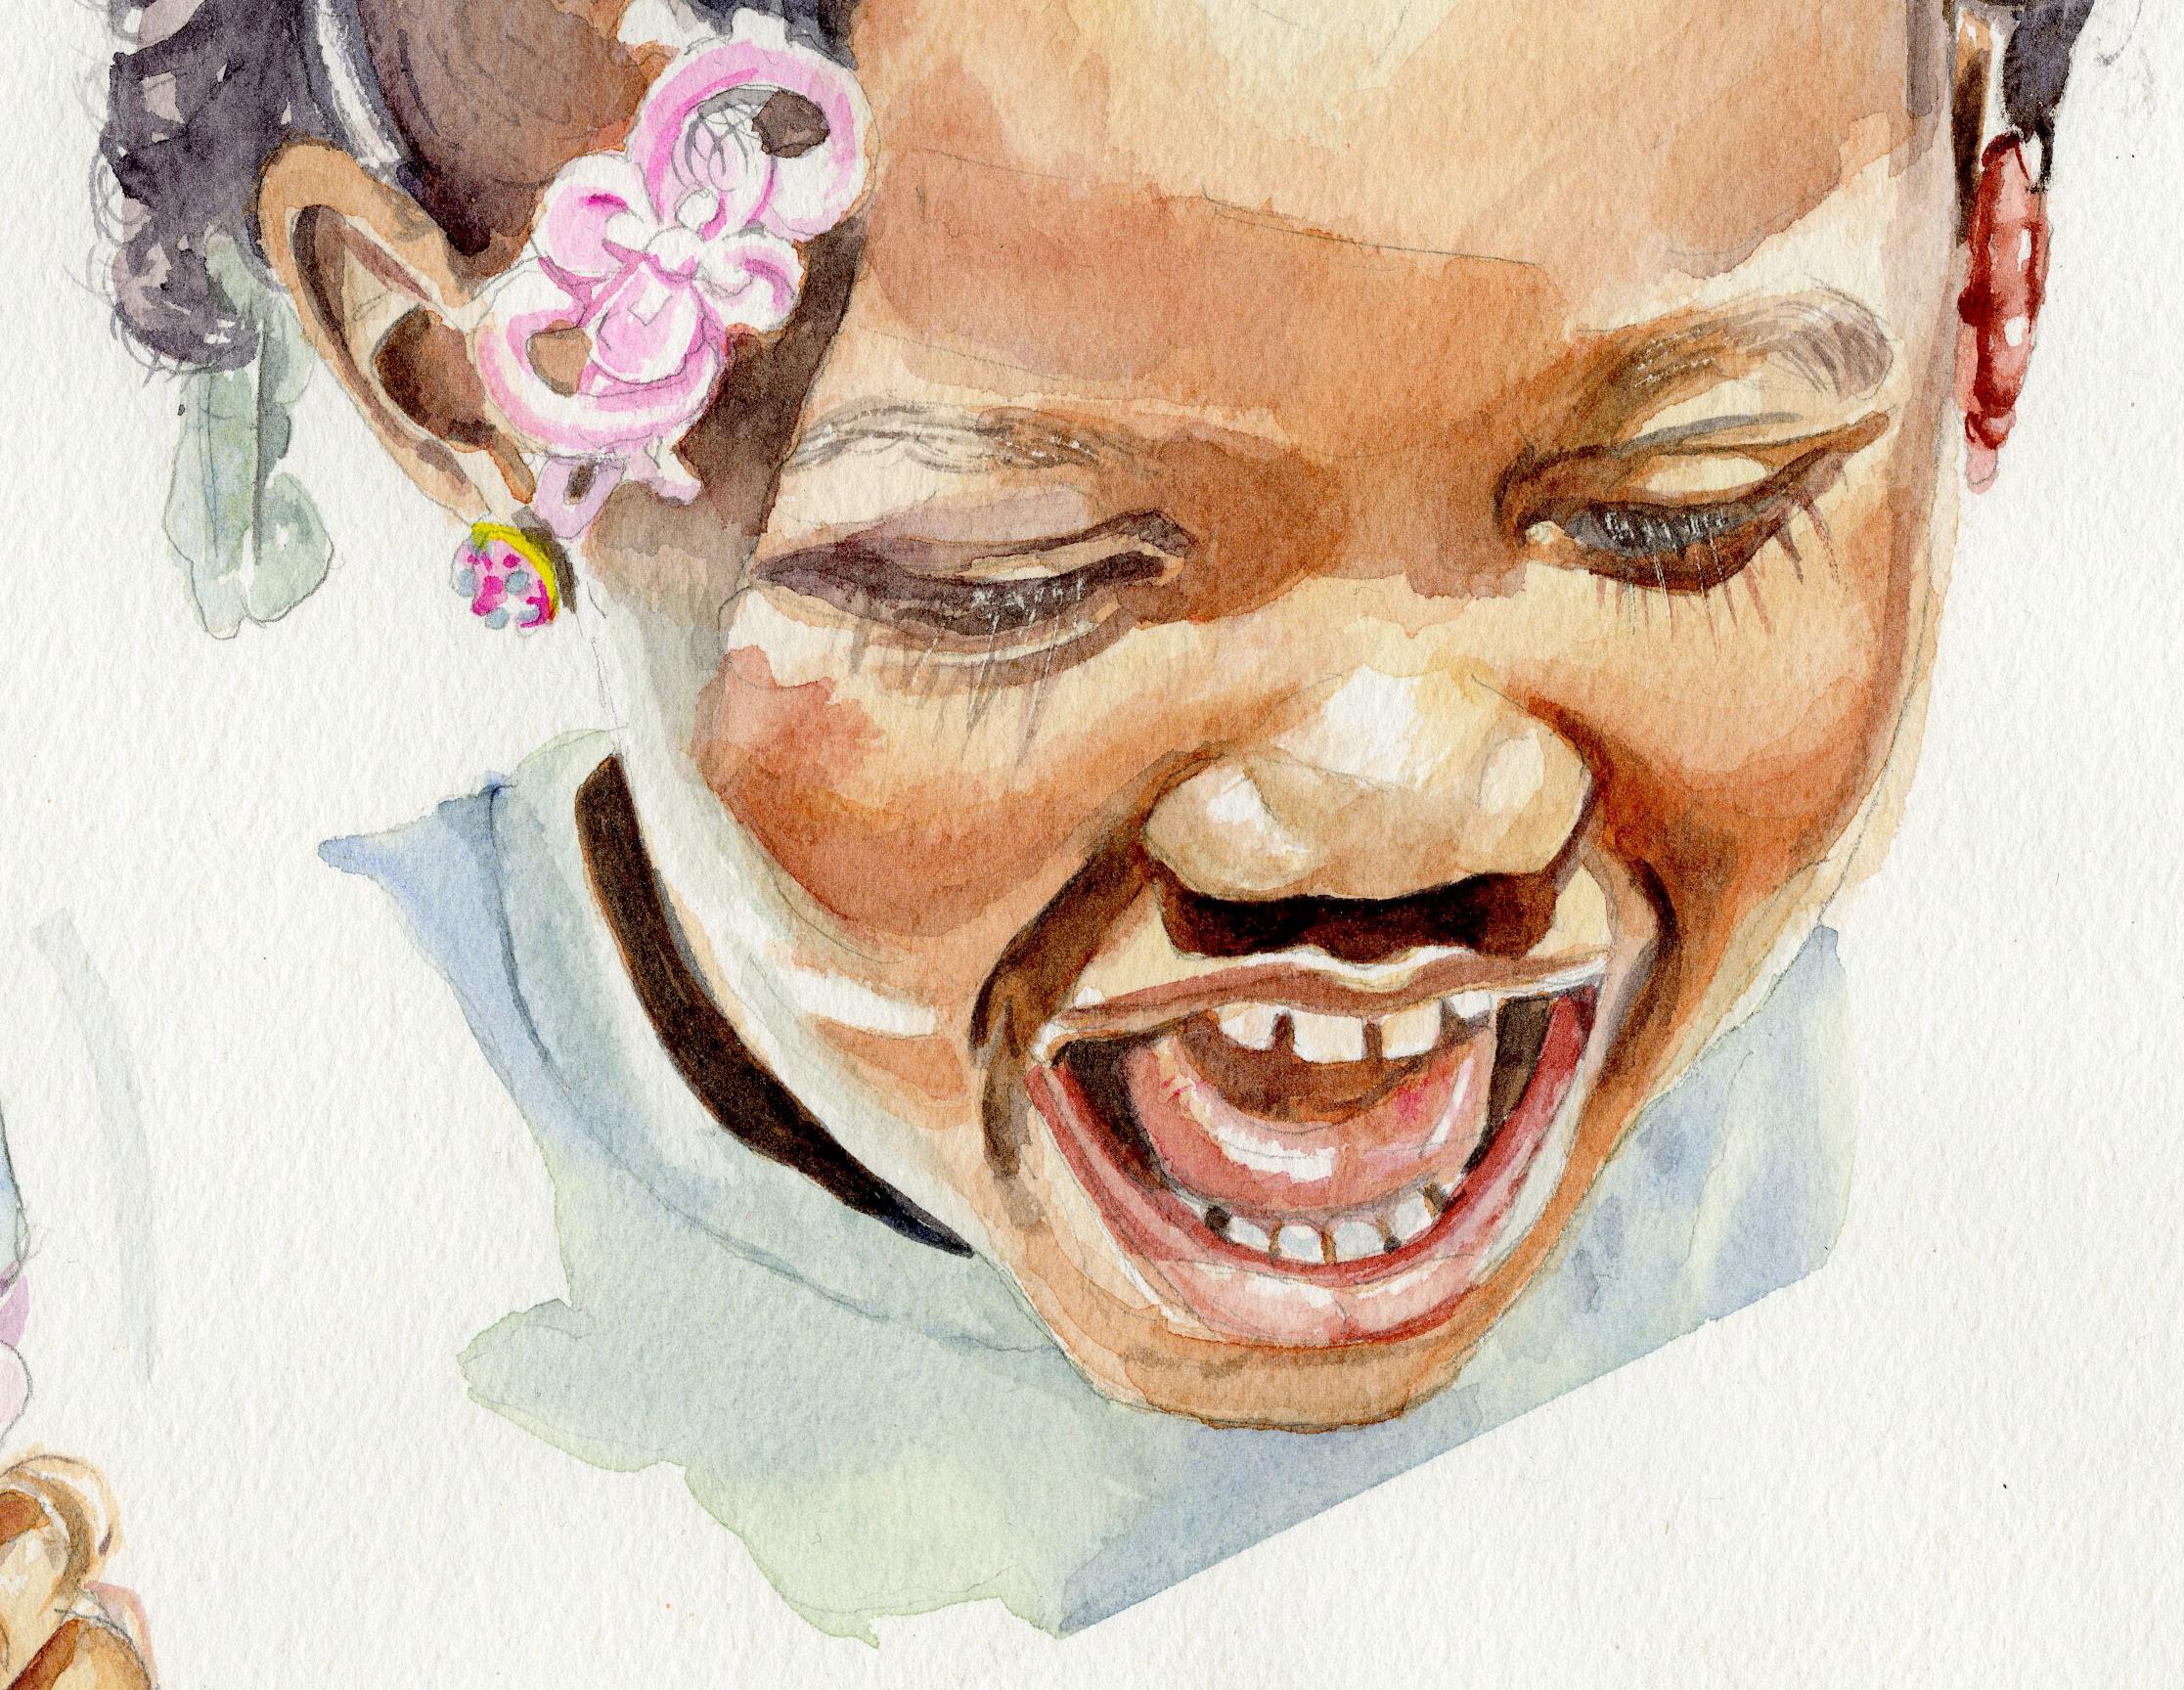 Stolen Moments, Attitude Shift #1    (Emily and Sippy Cup Smiling) - Beige Figurative Art by Darius Steward